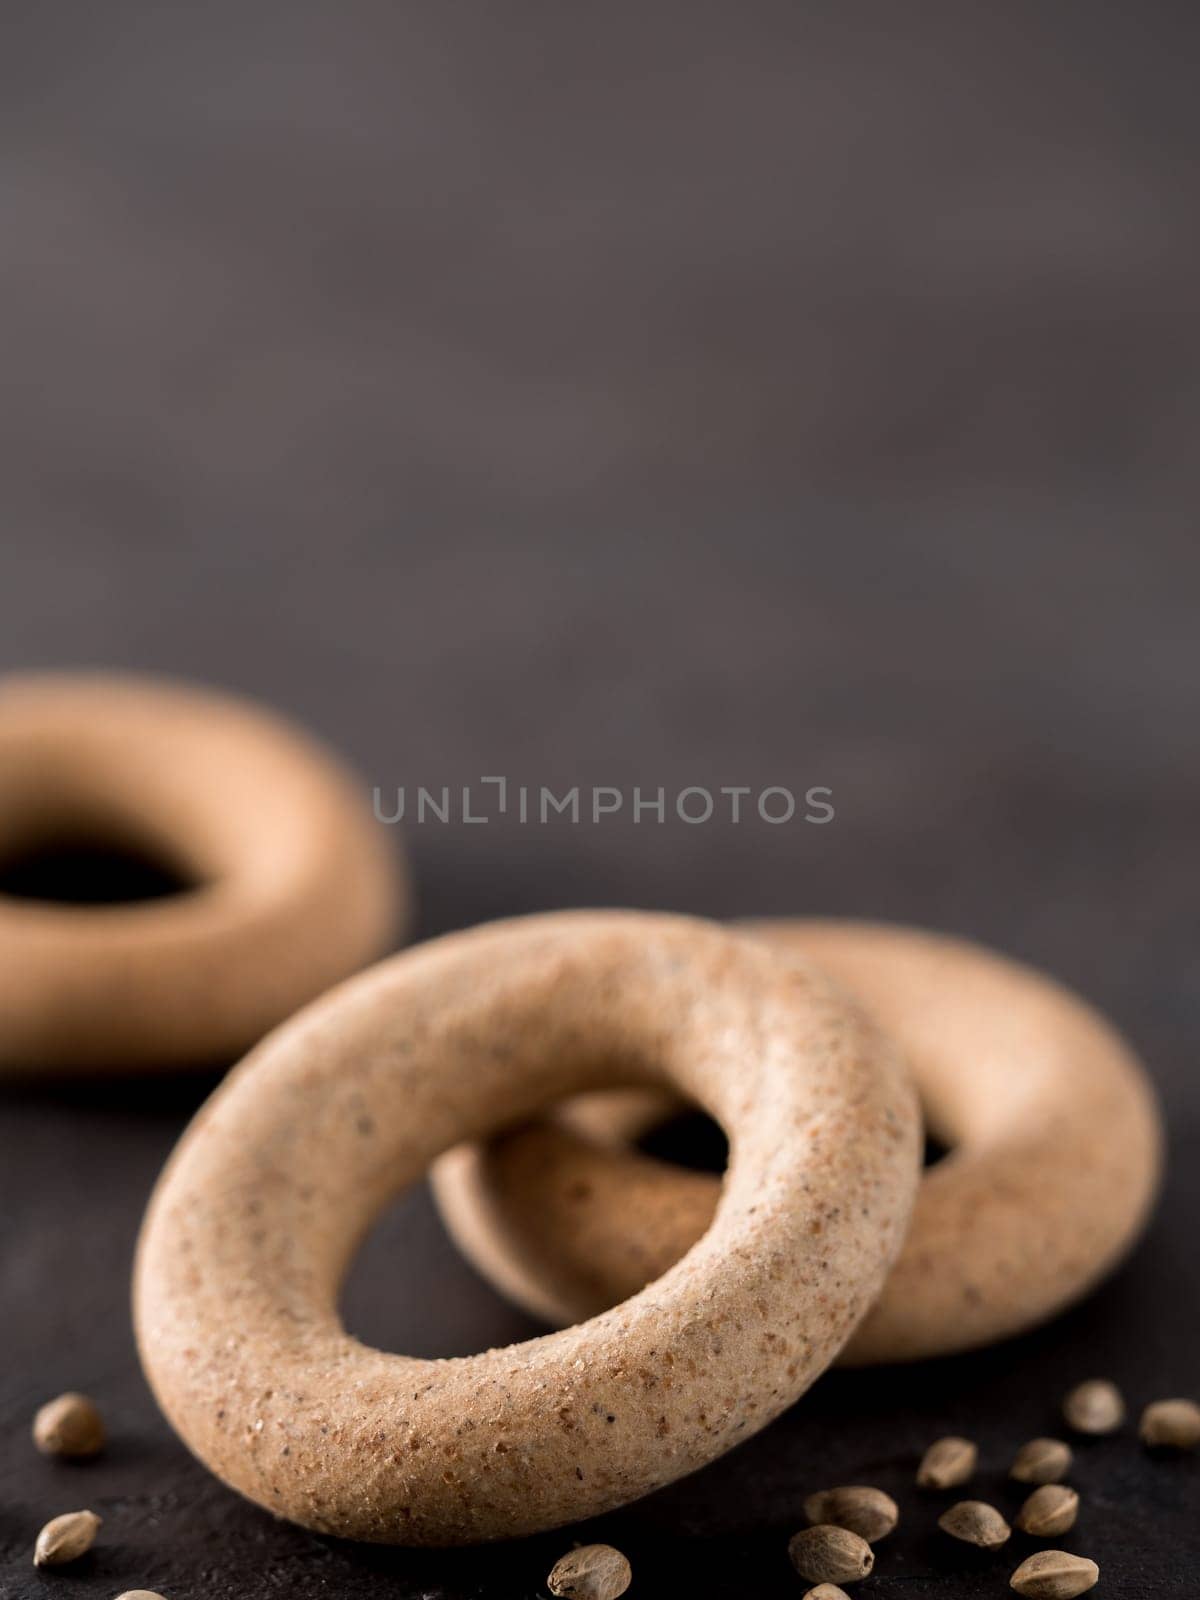 Ring-shaped cracknel with whole grain hemp seed flour and hemp seeds on black background. ring-shaped cracknel close up. Copy space Vertical.